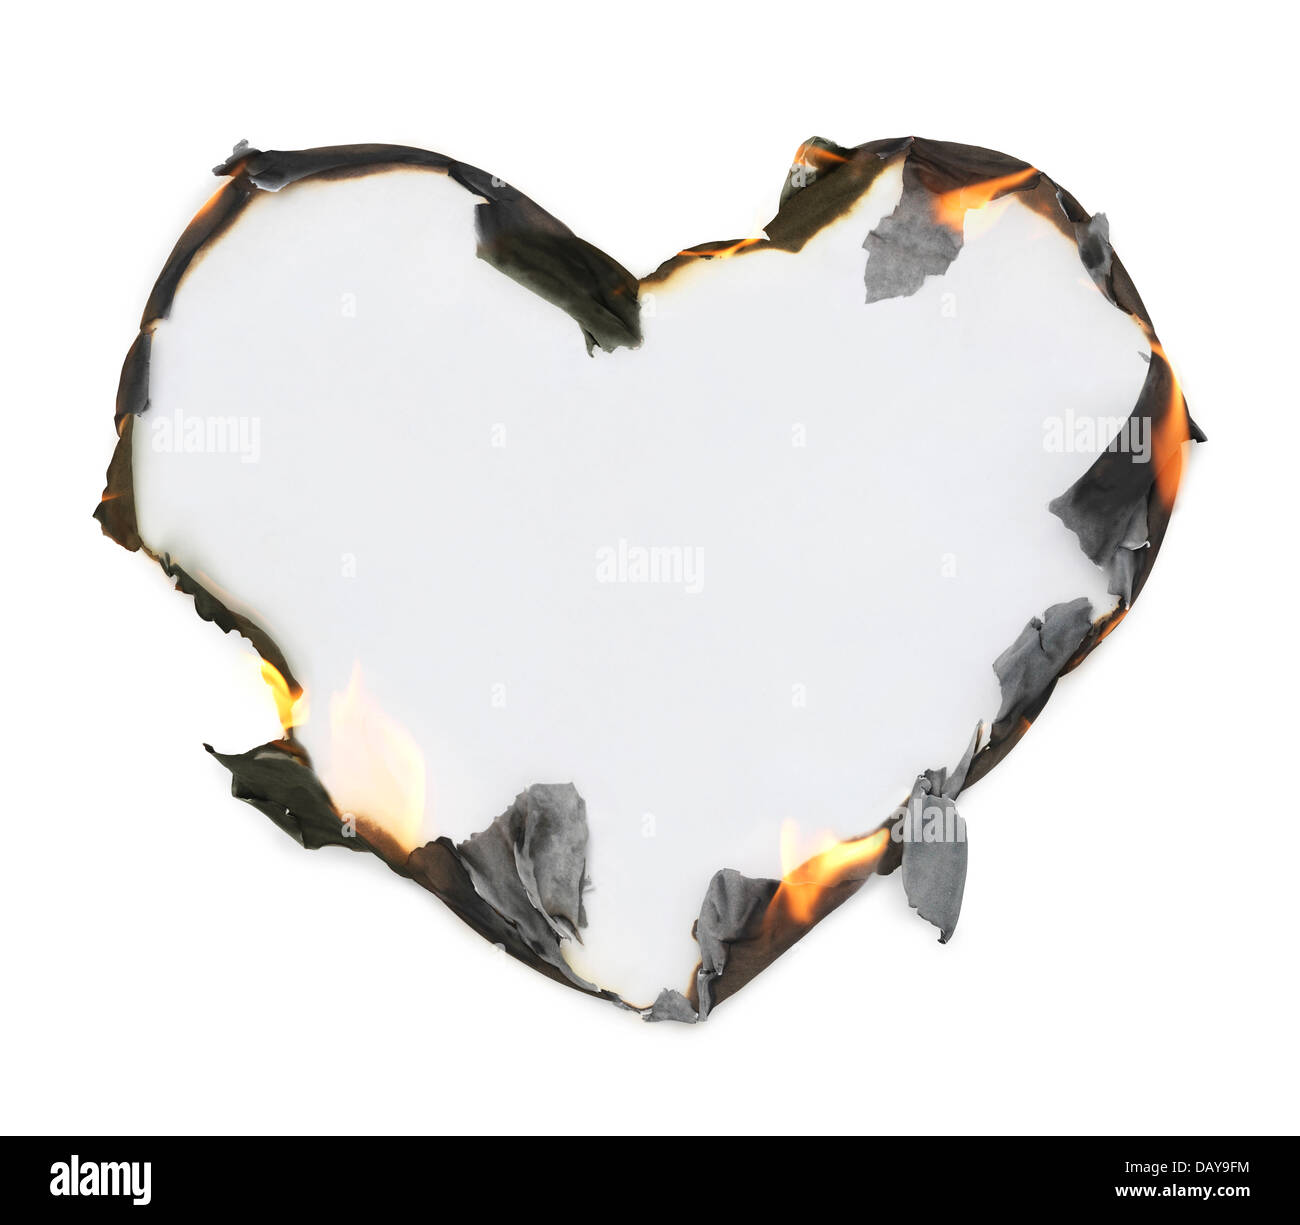 Blank heart shaped paper with burning edges, artistic conceptual frame isolated on white background with clipping path. Stock Photo